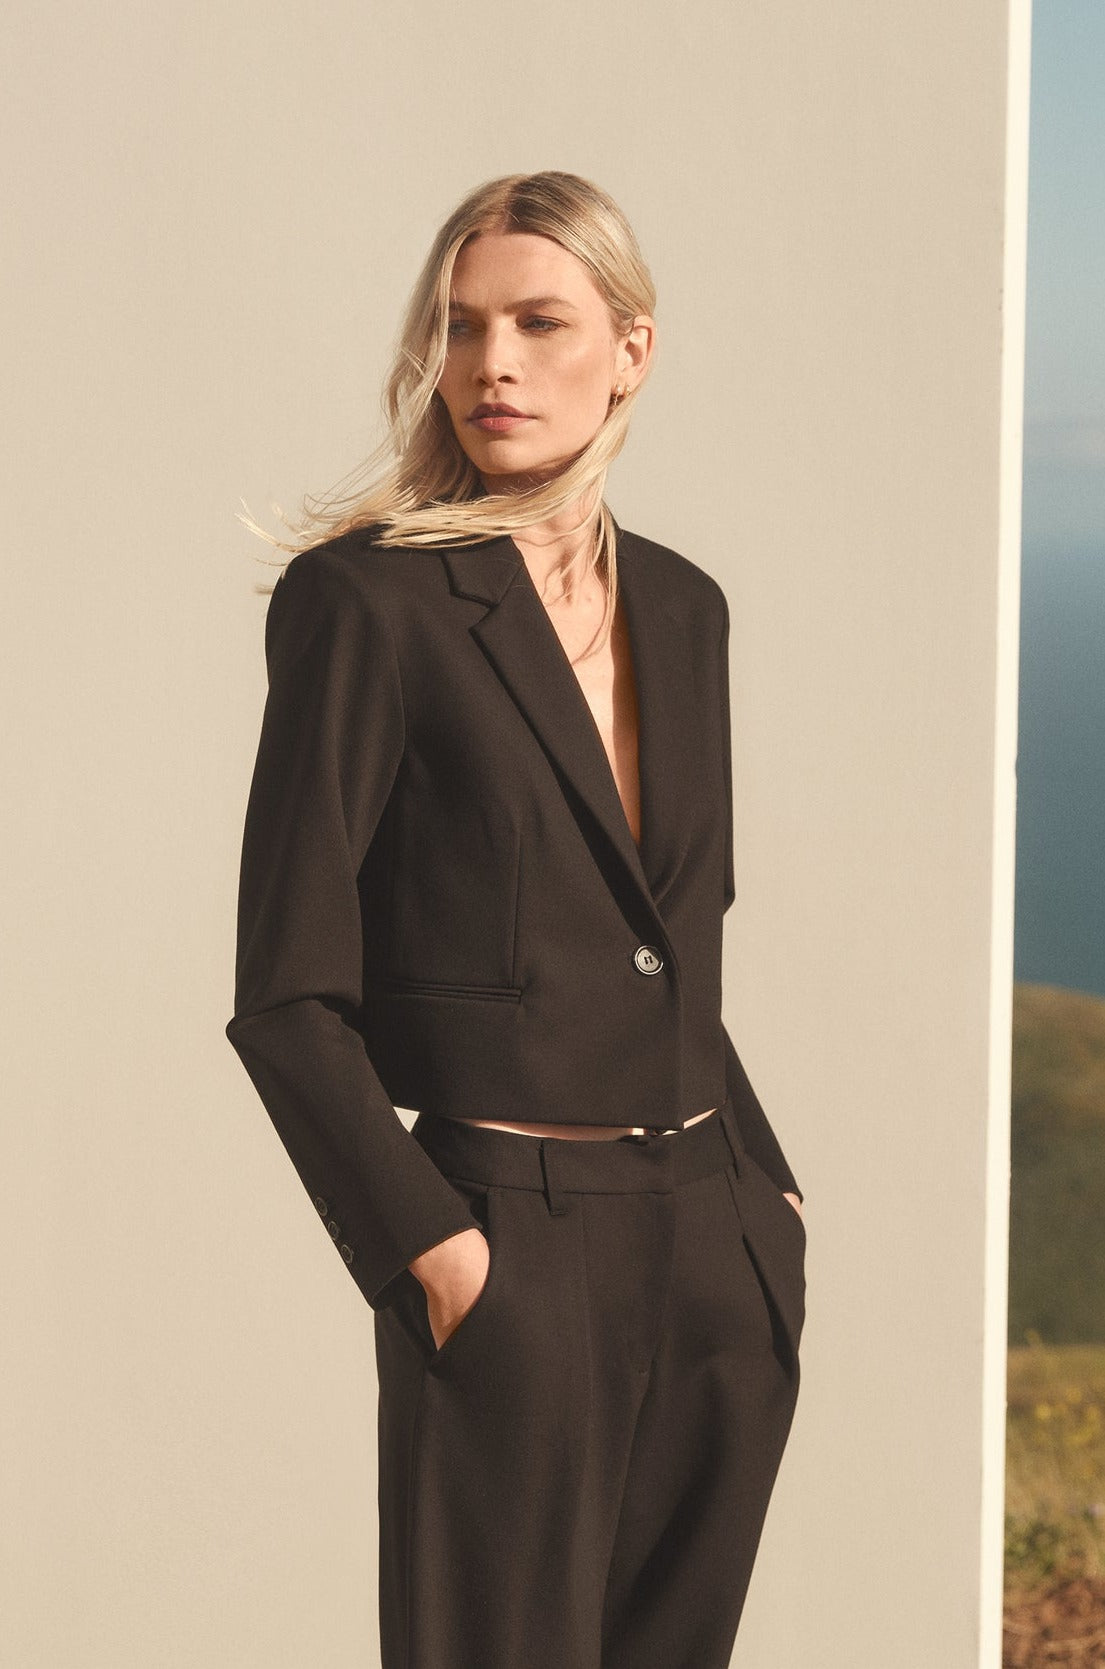 A woman wearing the Velvet by Graham & Spencer ANYA PONTI CROPPED BLAZER and pants.-35655683670209